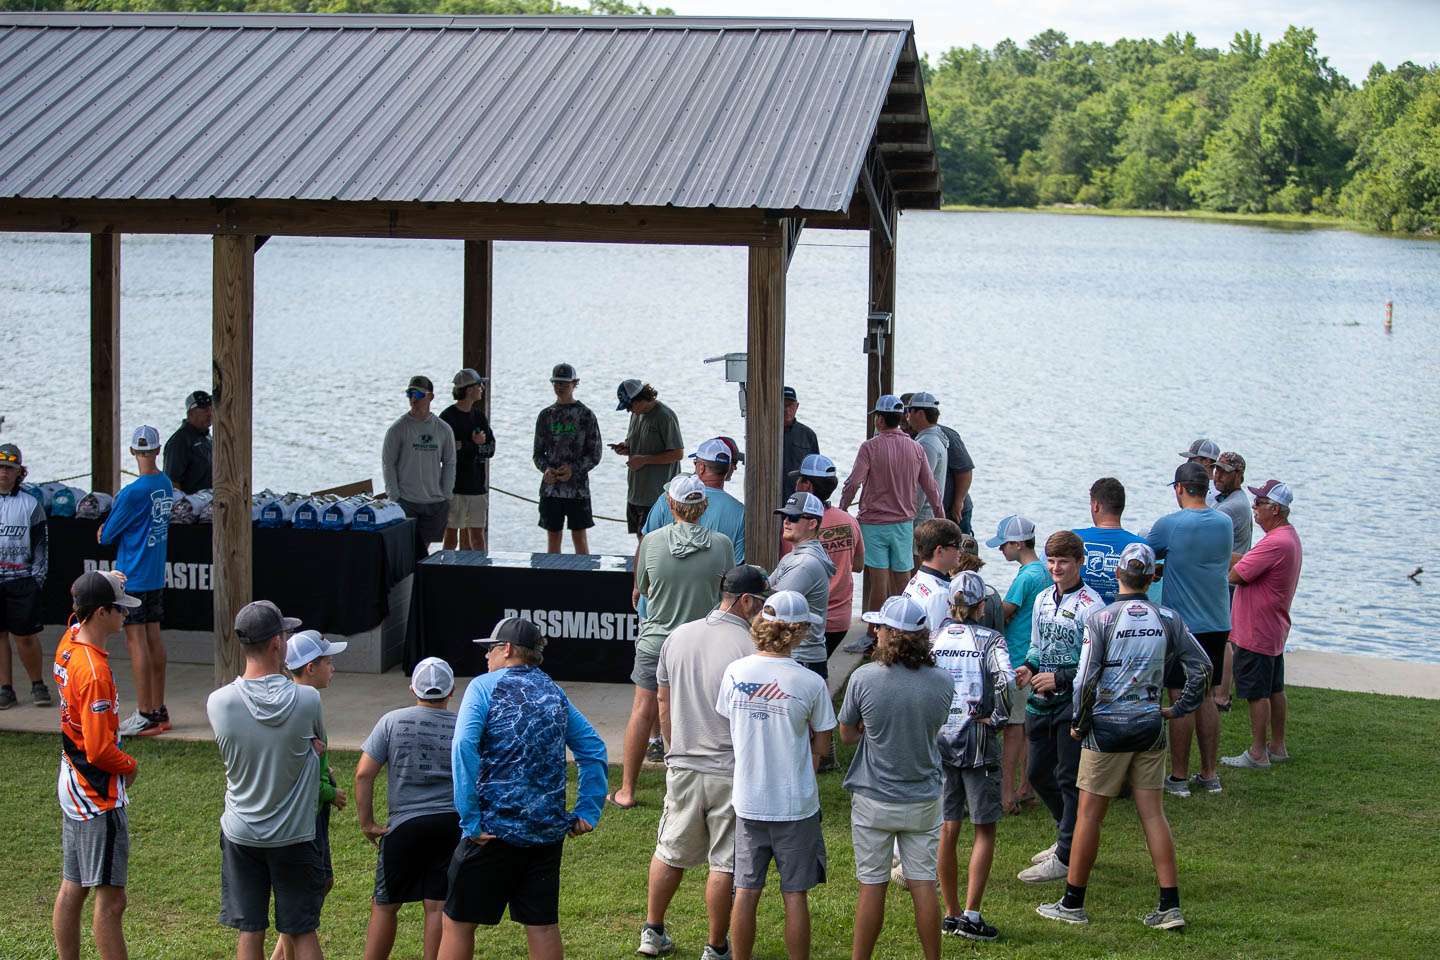 Teams gathered at Beeswax Creek for the final 2021 Mossy Oak Fishing Bassmaster High School Series at Lay Lake presented by Academy Sports + Outdoors before the Championship next month. 